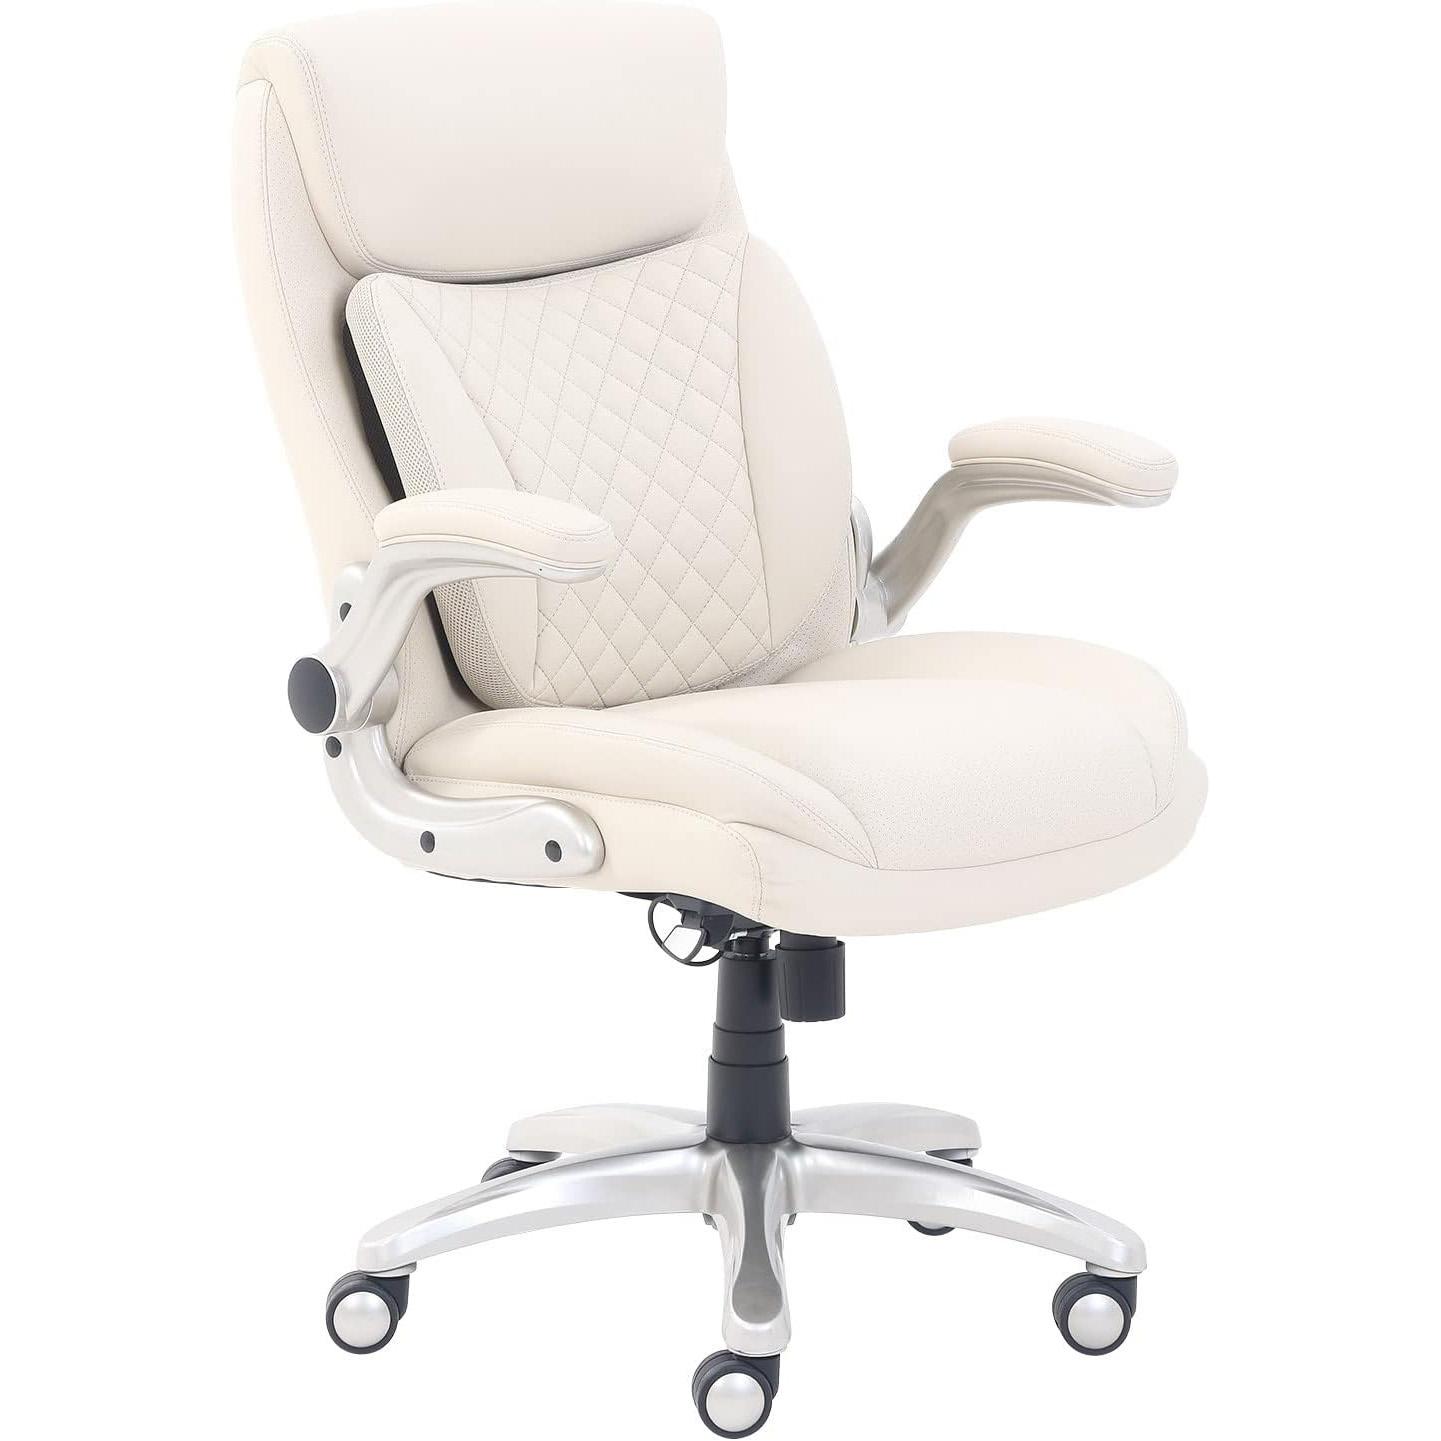 AmazonCommercial Ergonomic Executive Office Desk Chair for $144.86 Shipped